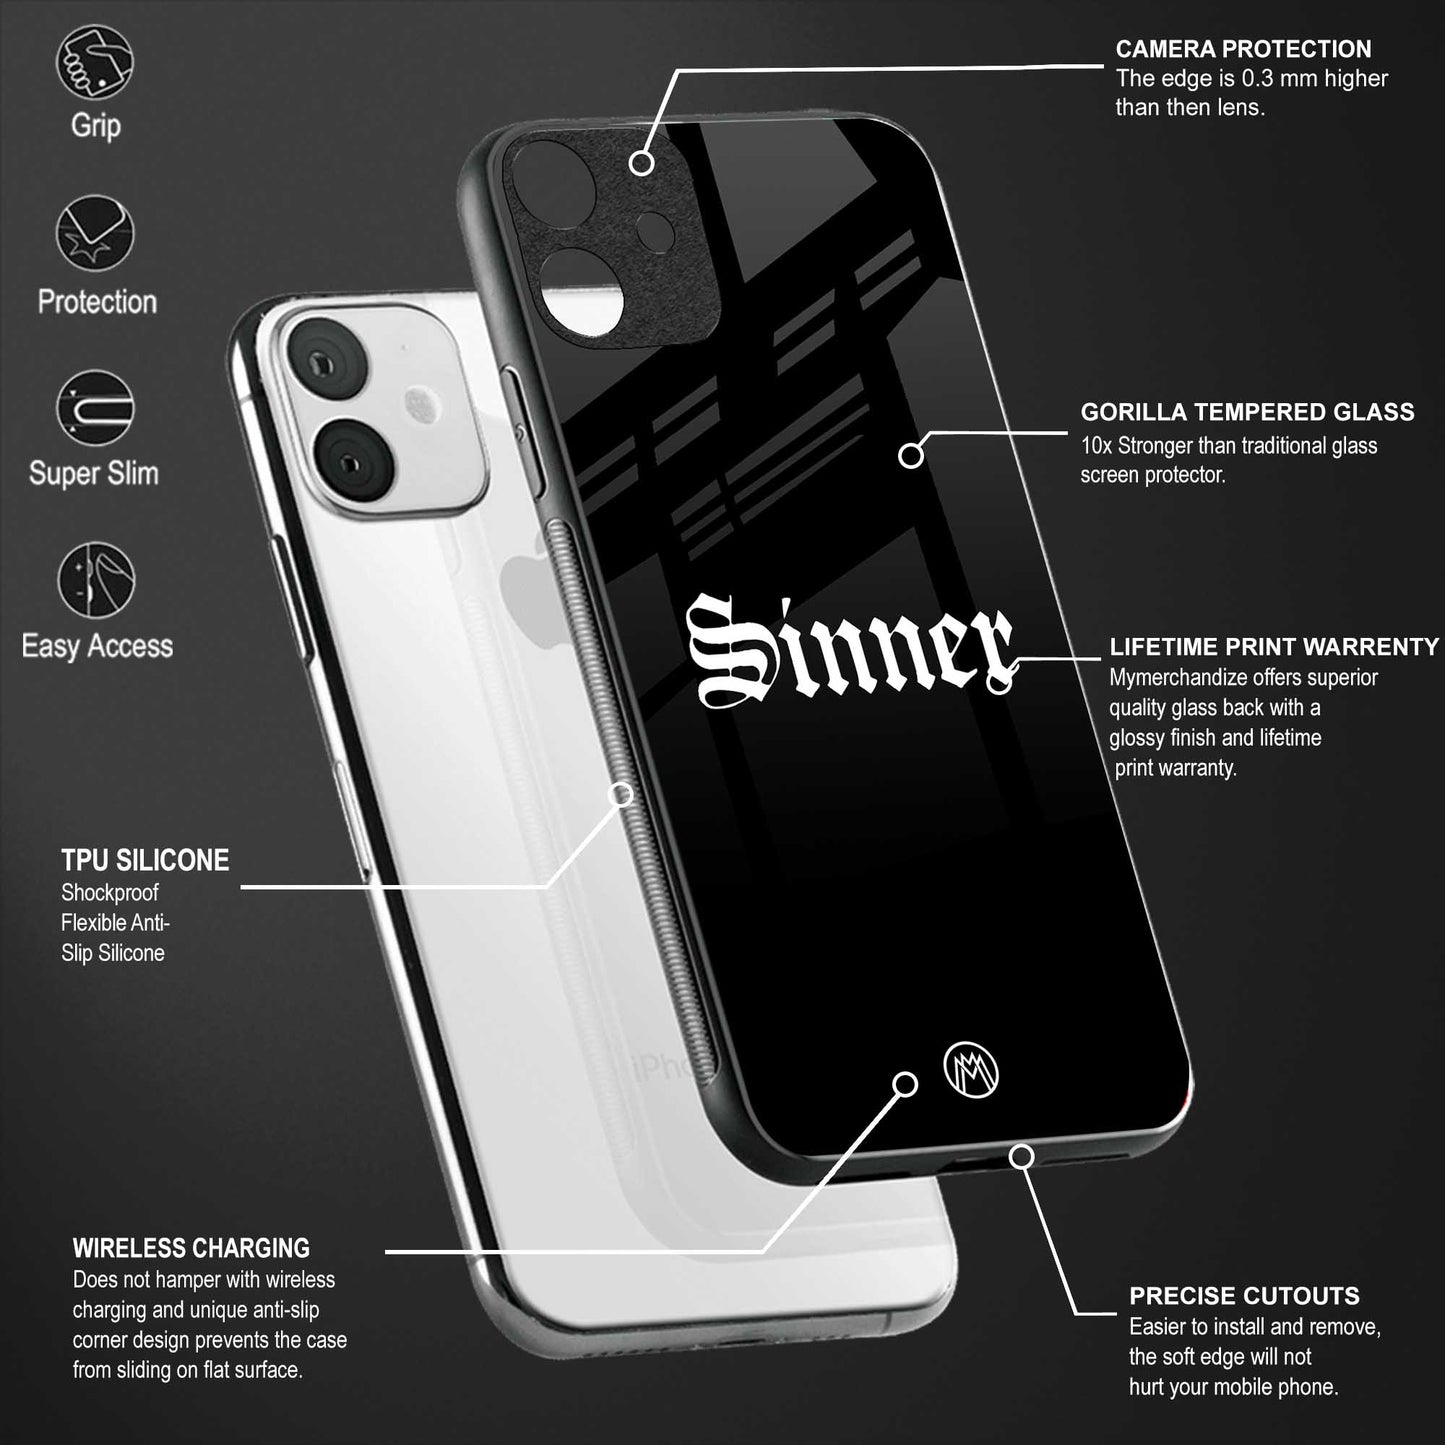 sinner back phone cover | glass case for oneplus nord ce 2 lite 5g